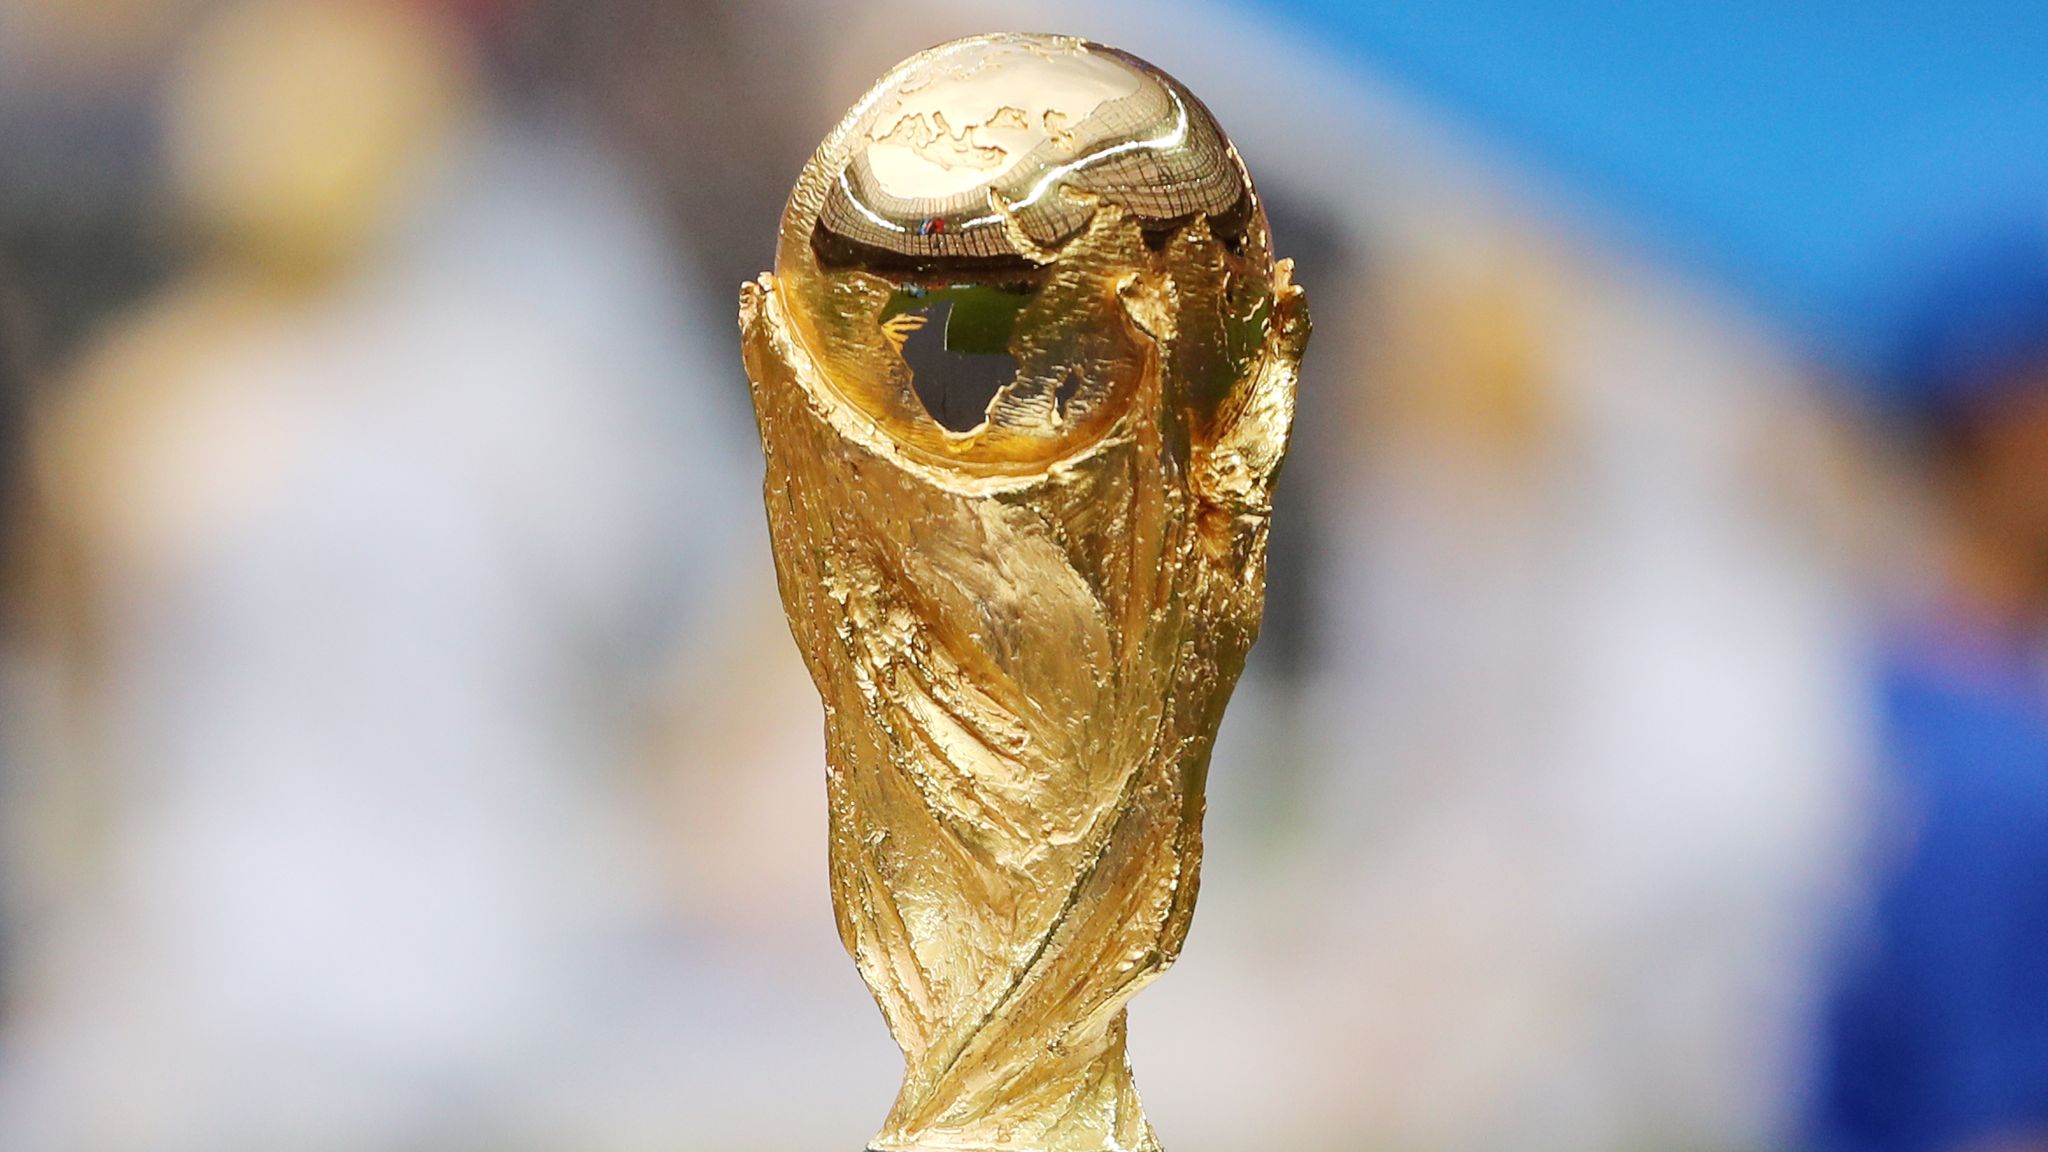 SWINDON, UK - JUNE 11, 2014: FIFA World Cup Trophy And Adidas